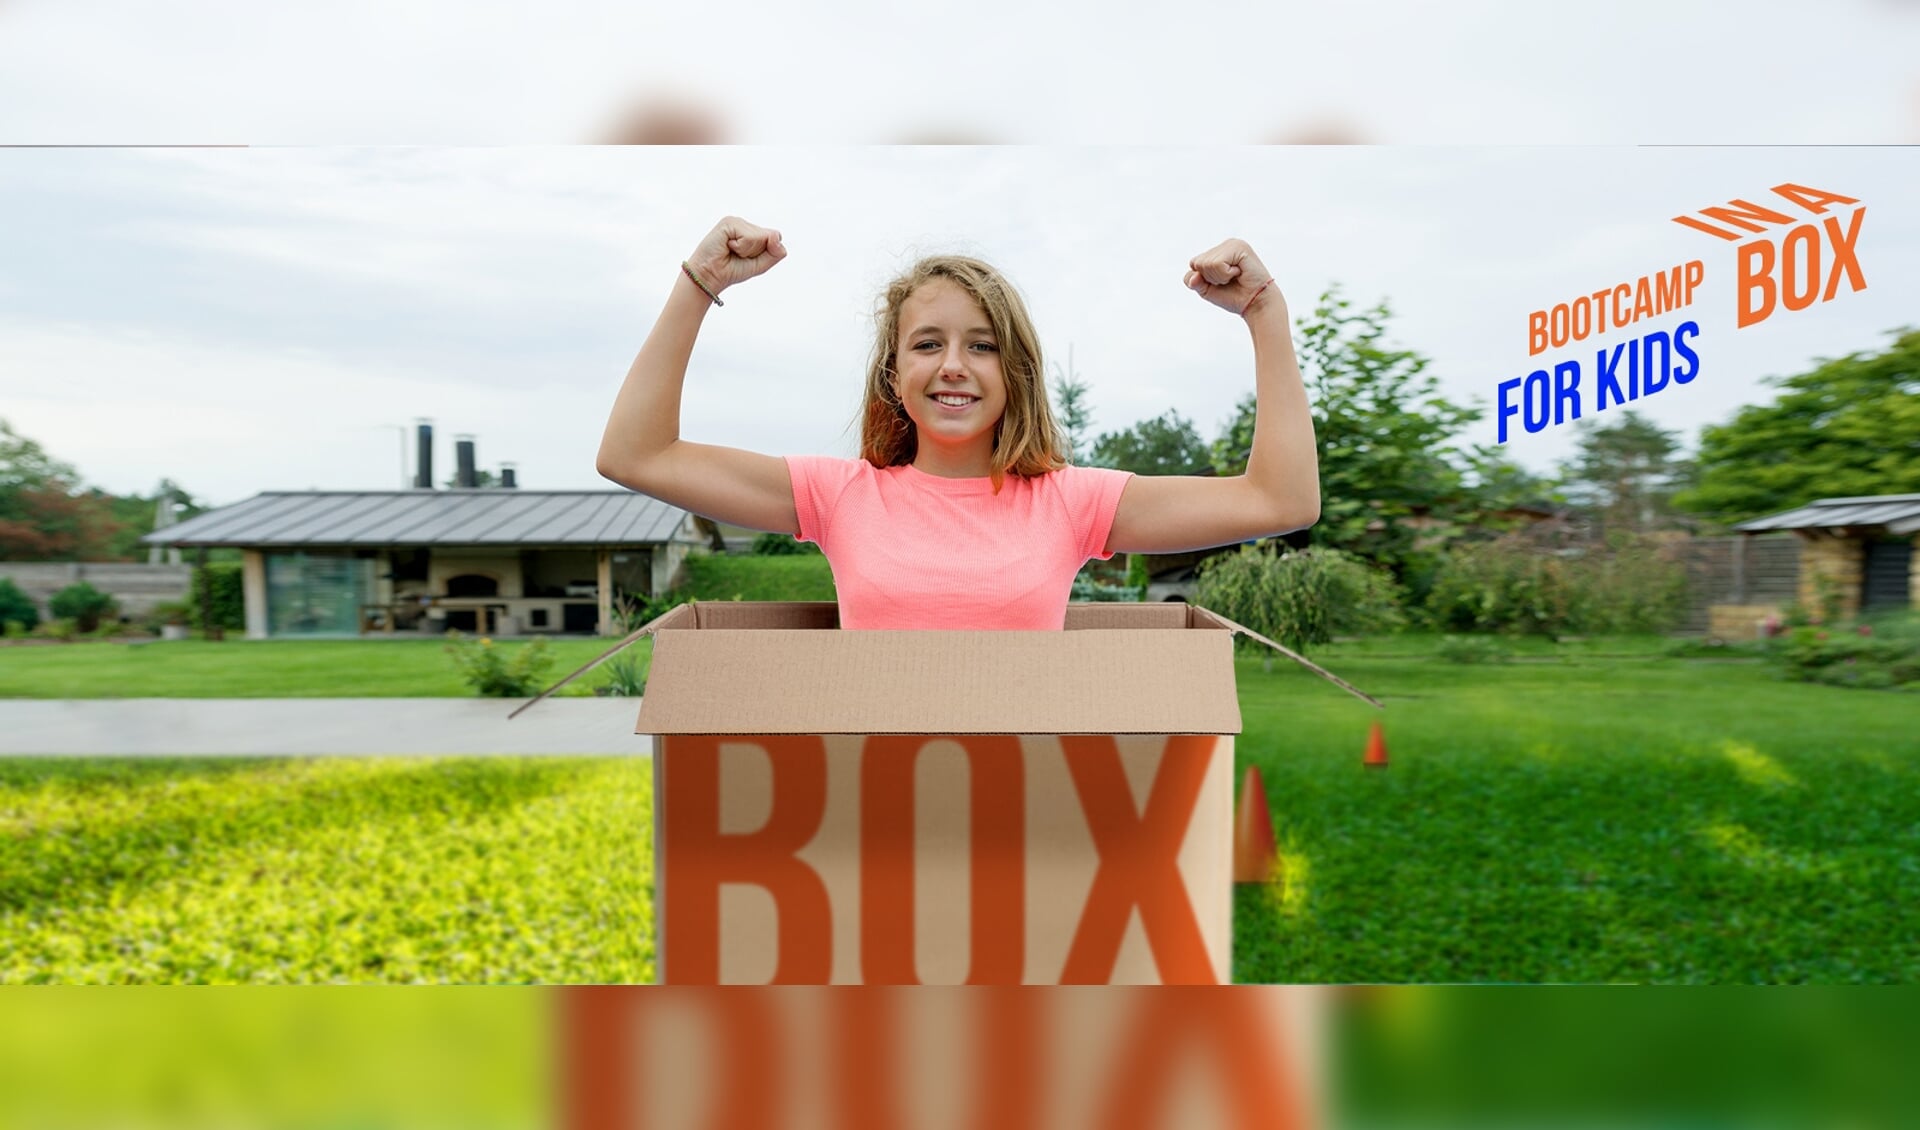 Bootcamp for kids IN A BOX